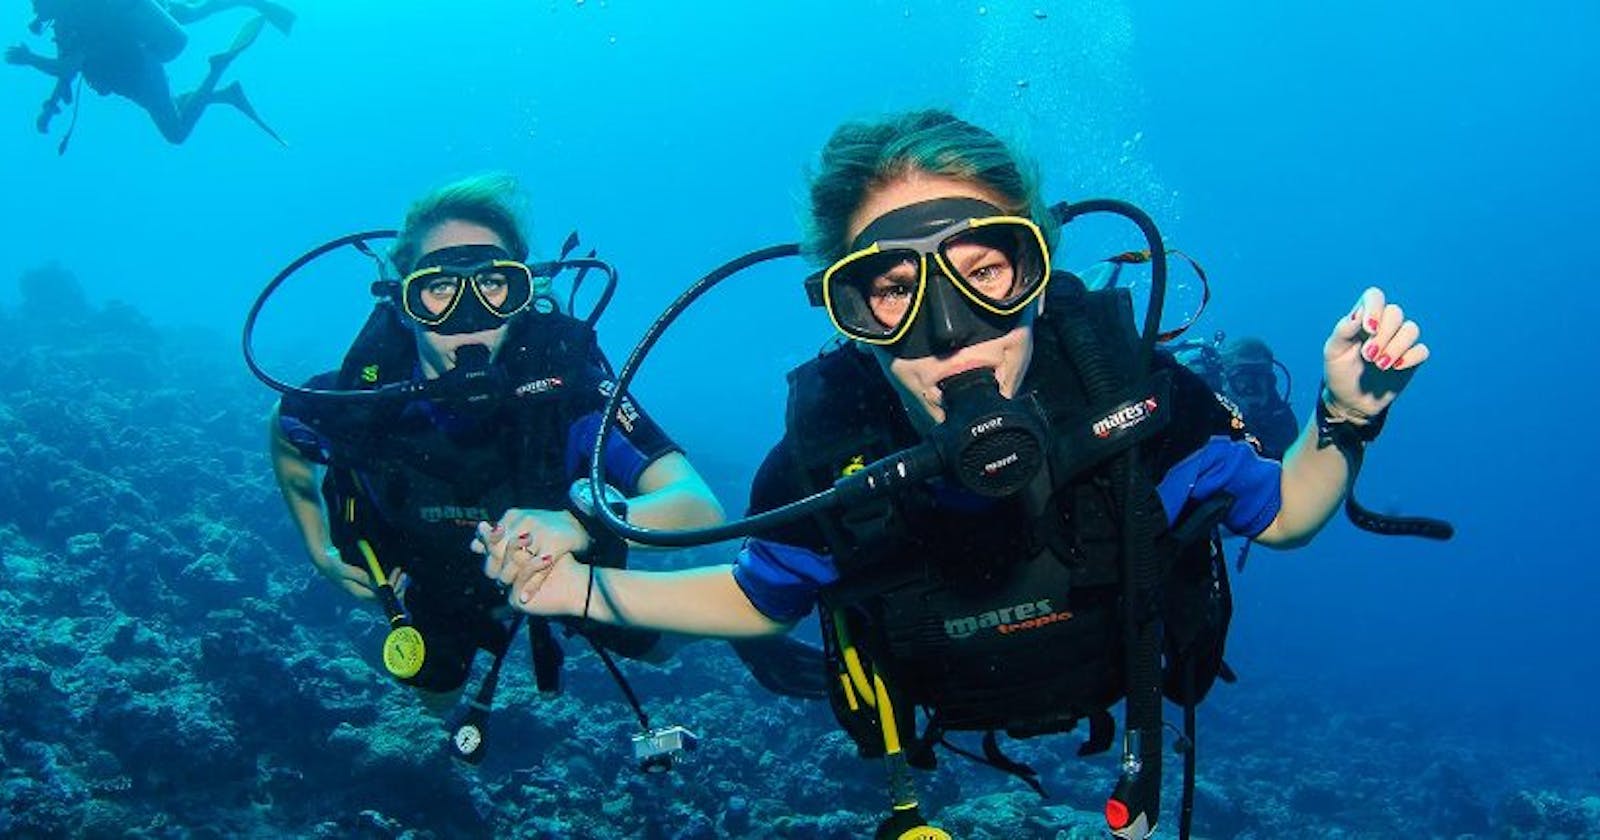 Scuba Diving Certification - What to Expect During Your Scuba Diving Certification Training